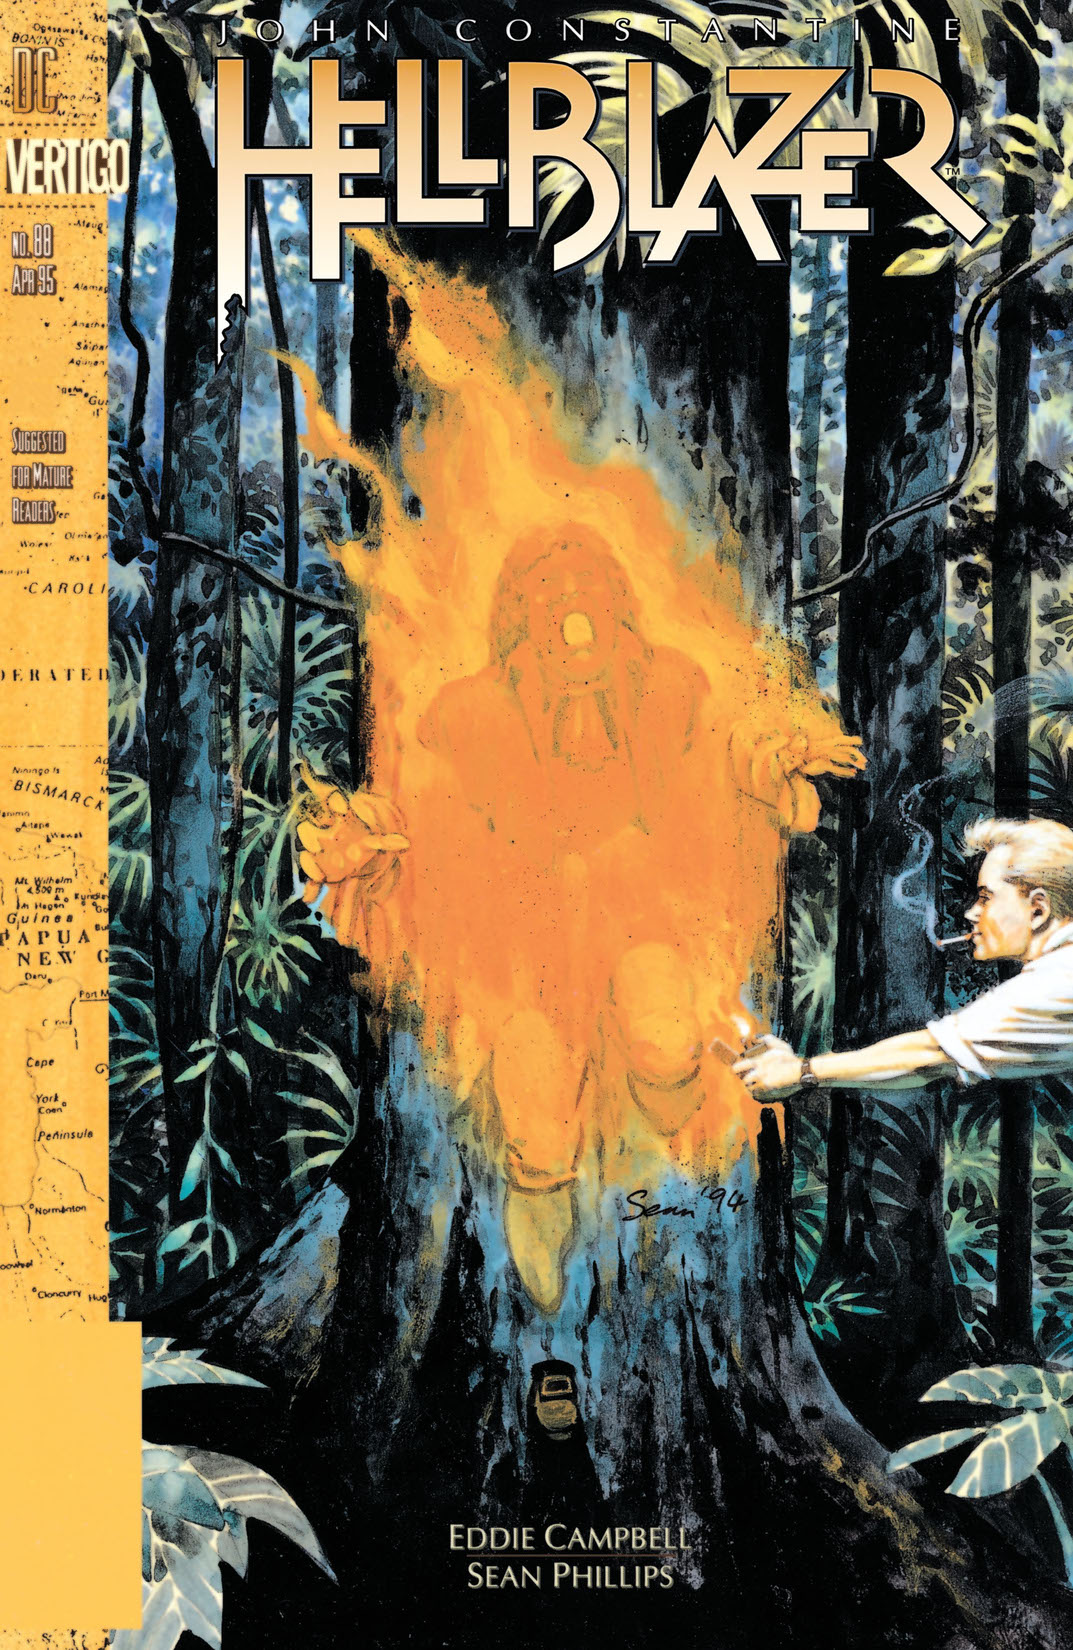 Hellblazer #88 preview images